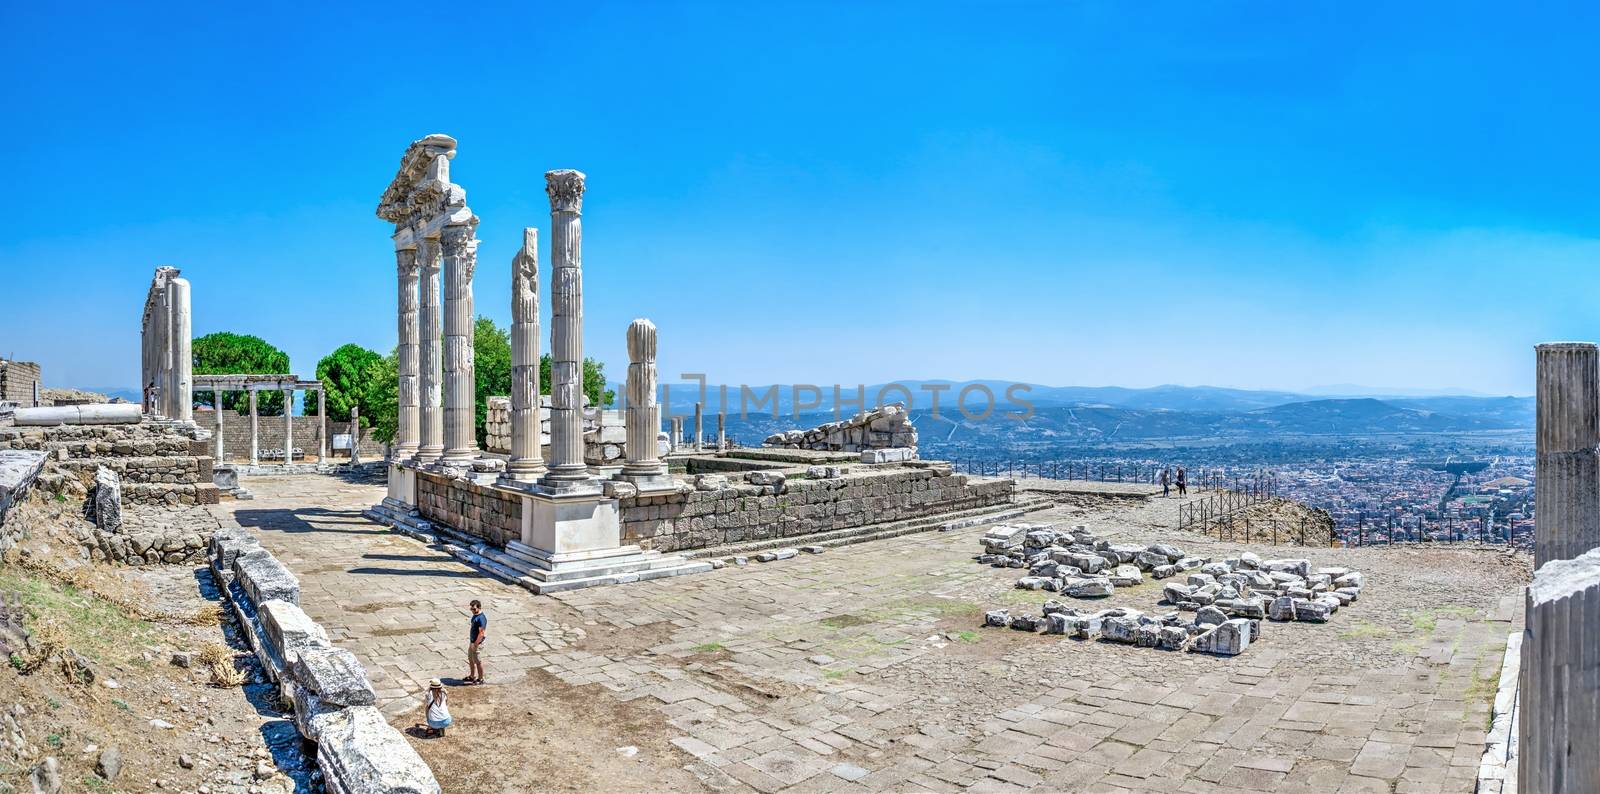 Temple of Dionysos in the Pergamon Ancient City, Turkey by Multipedia